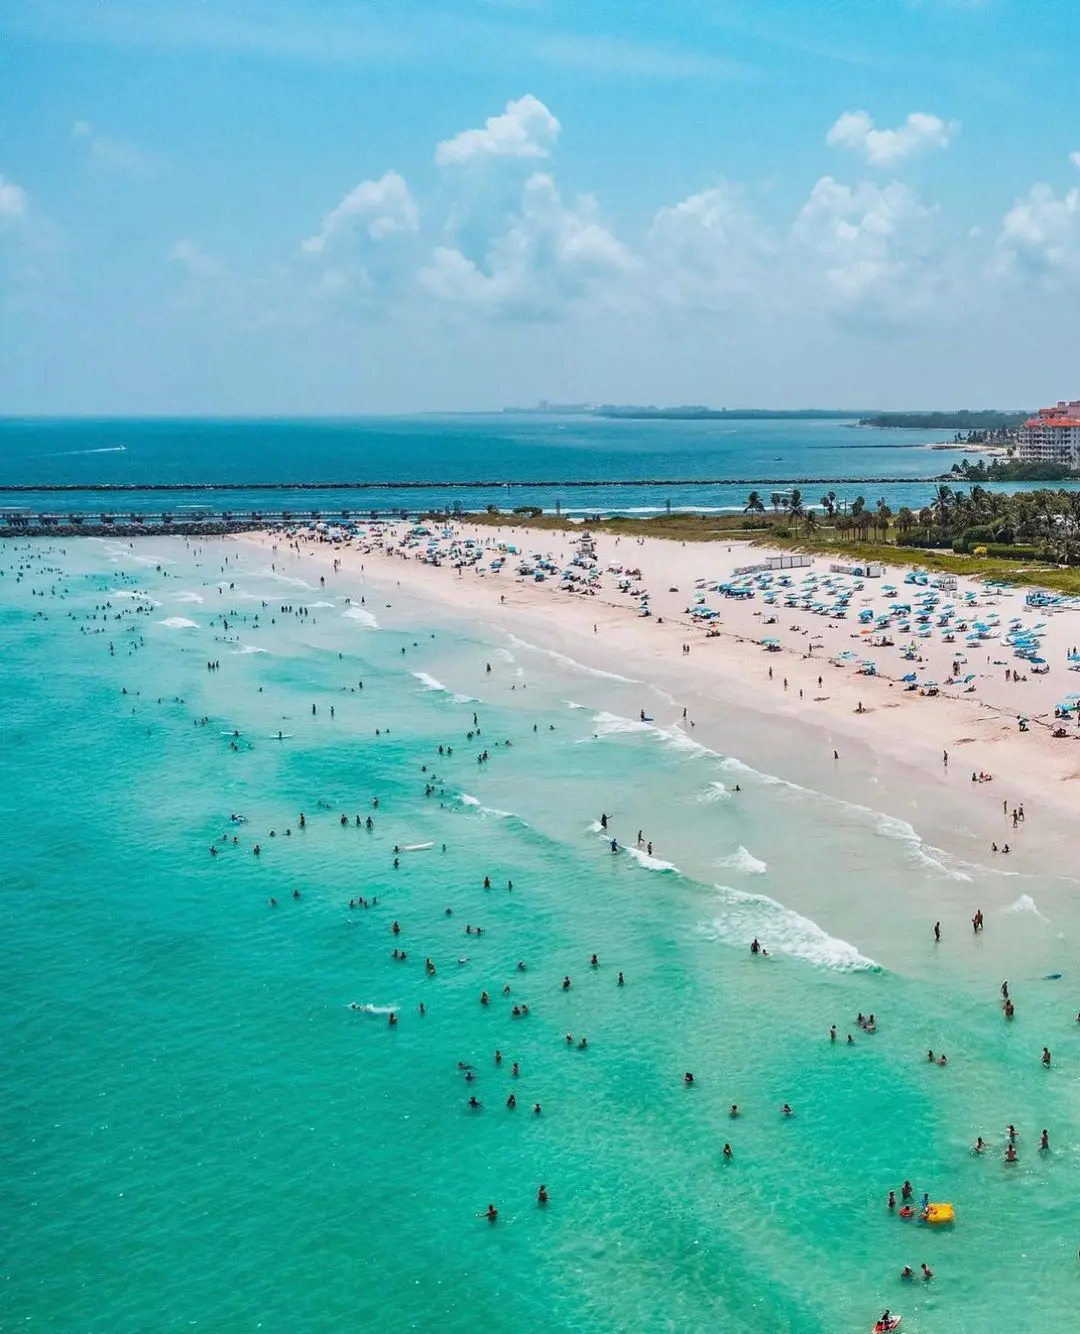 Miami Beach is people favorite for its clear beaches